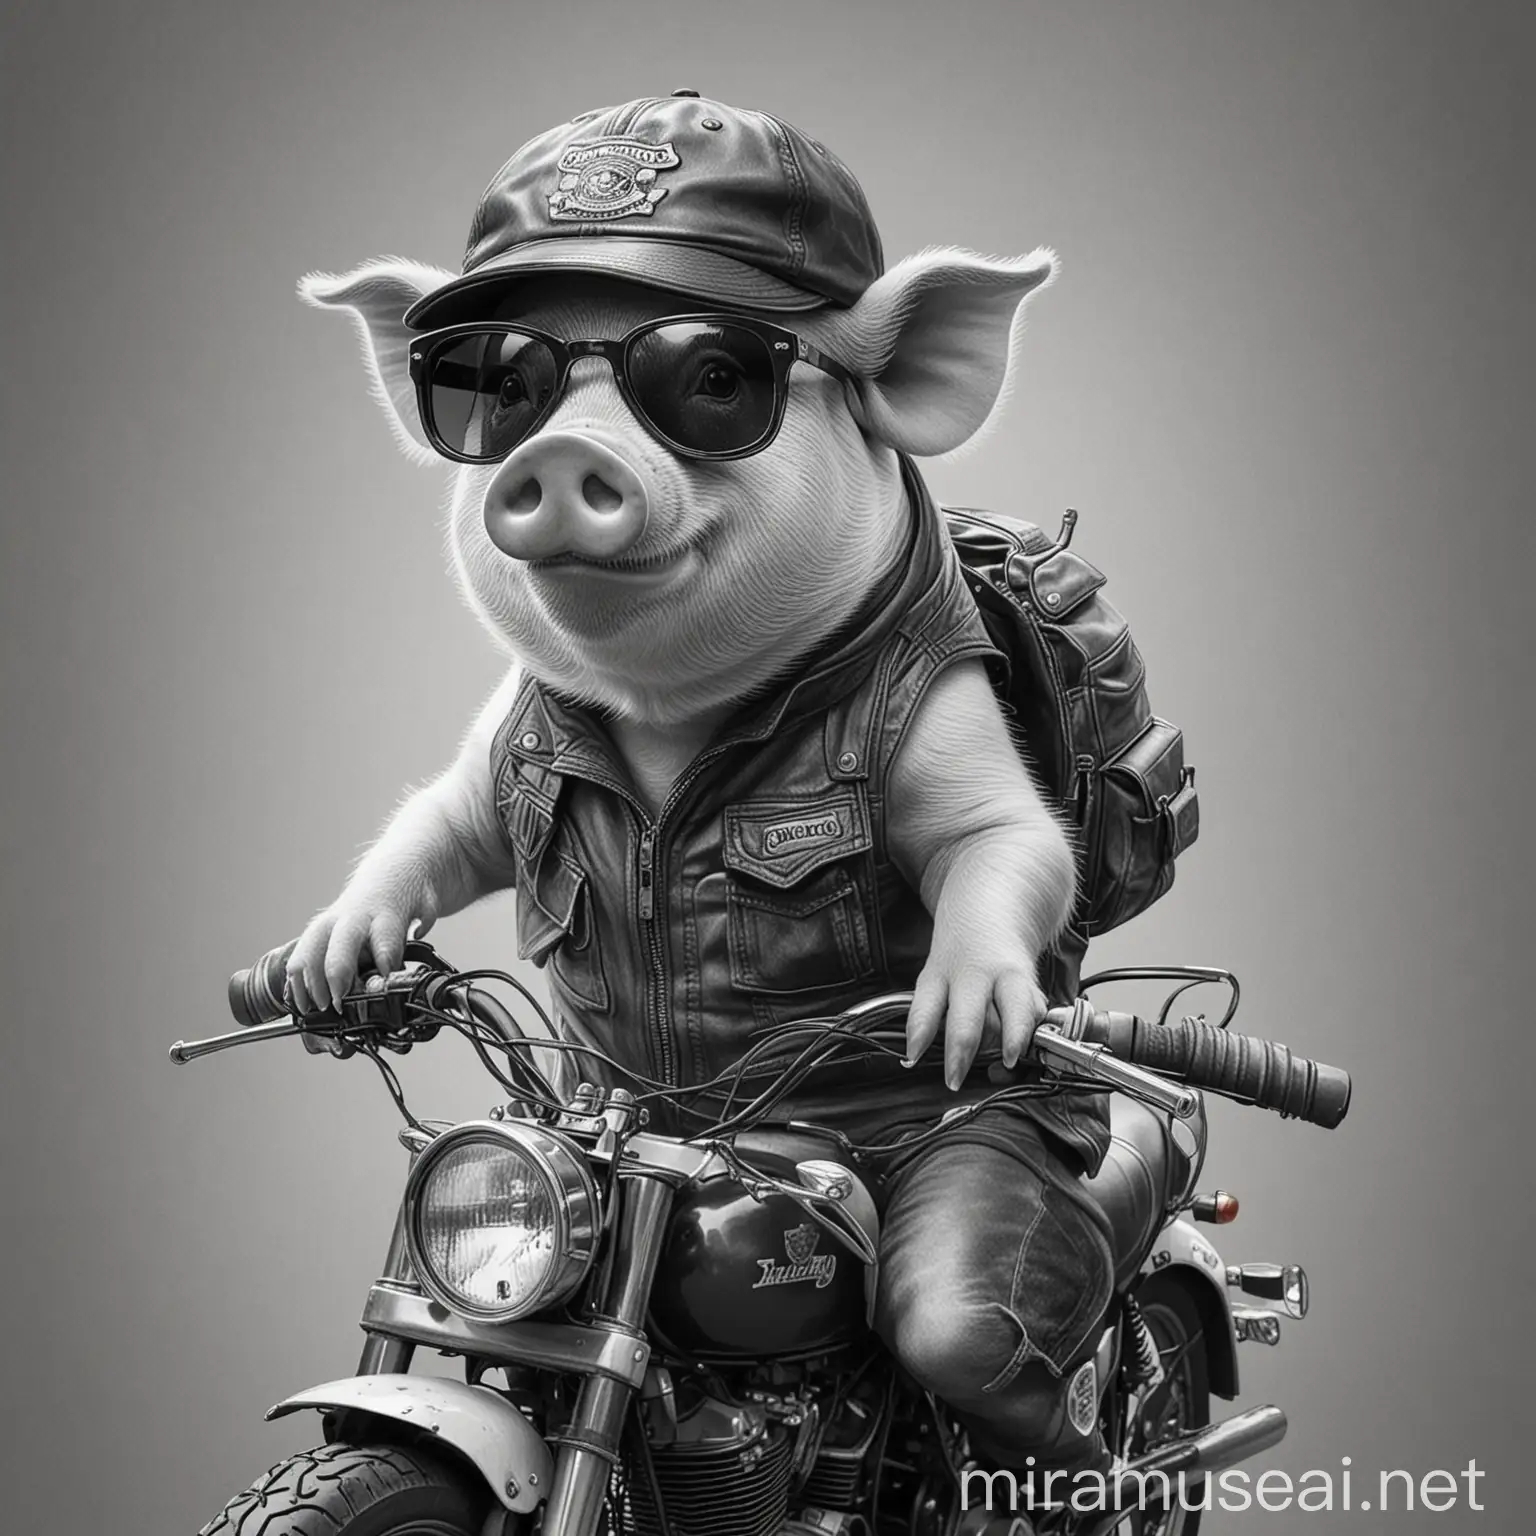 Cool Pig Riding Motorcycle with Cap and Sunglasses